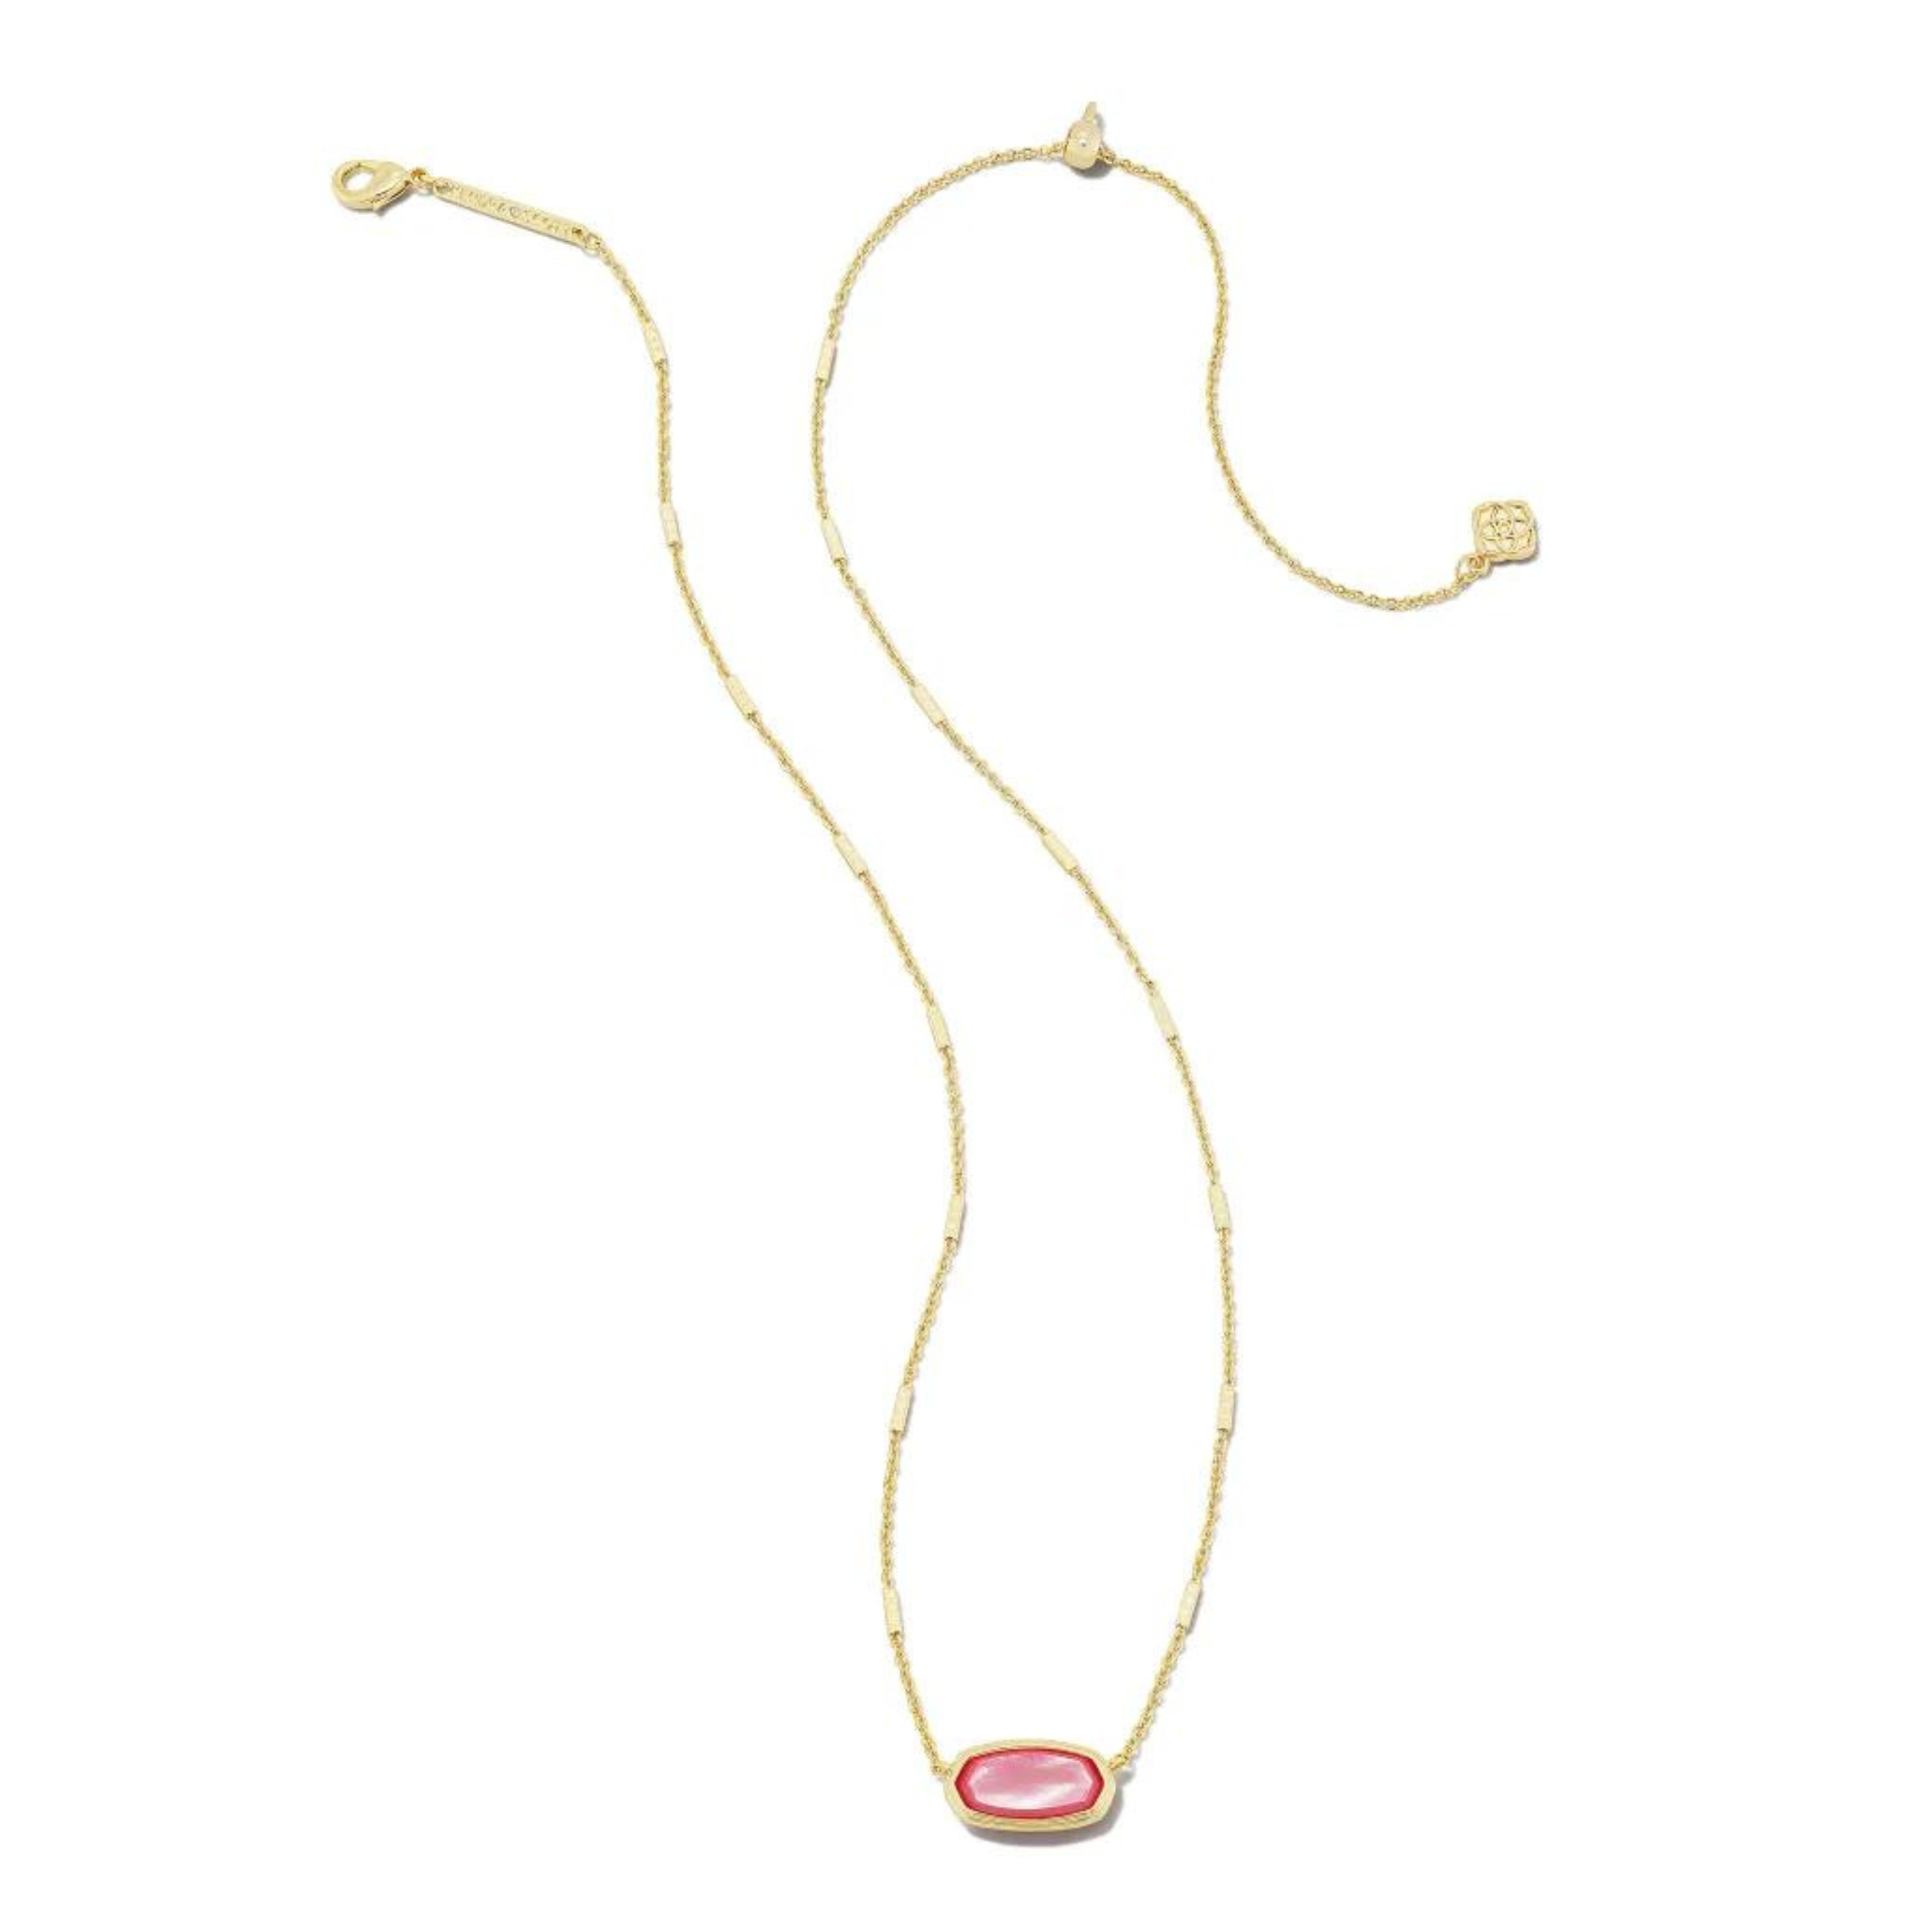 Kendra Scott | Framed Elisa Gold Short Pendant Necklace in Peony Mother-of-Pearl - Giddy Up Glamour Boutique